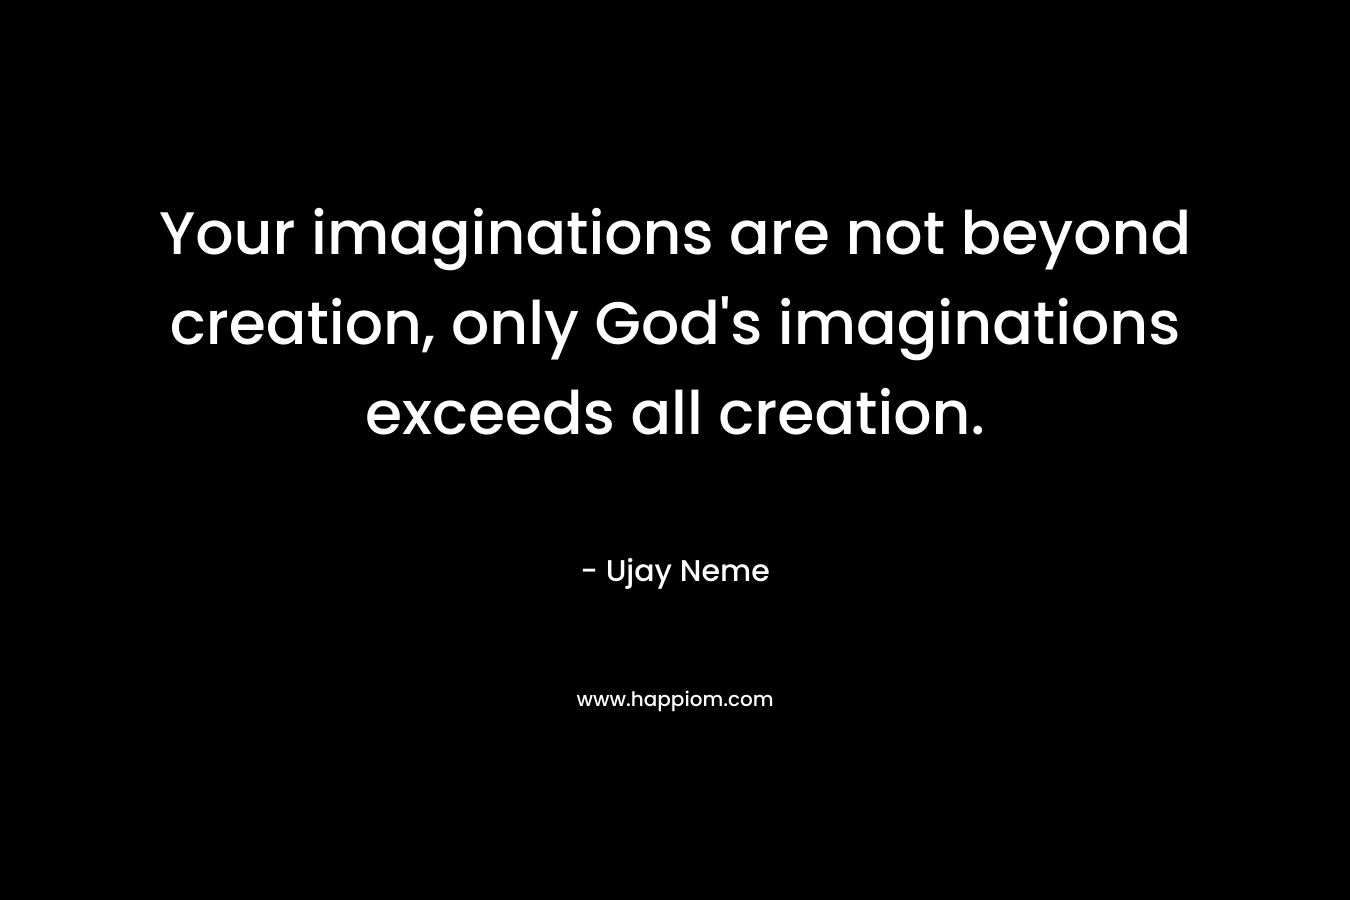 Your imaginations are not beyond creation, only God's imaginations exceeds all creation.